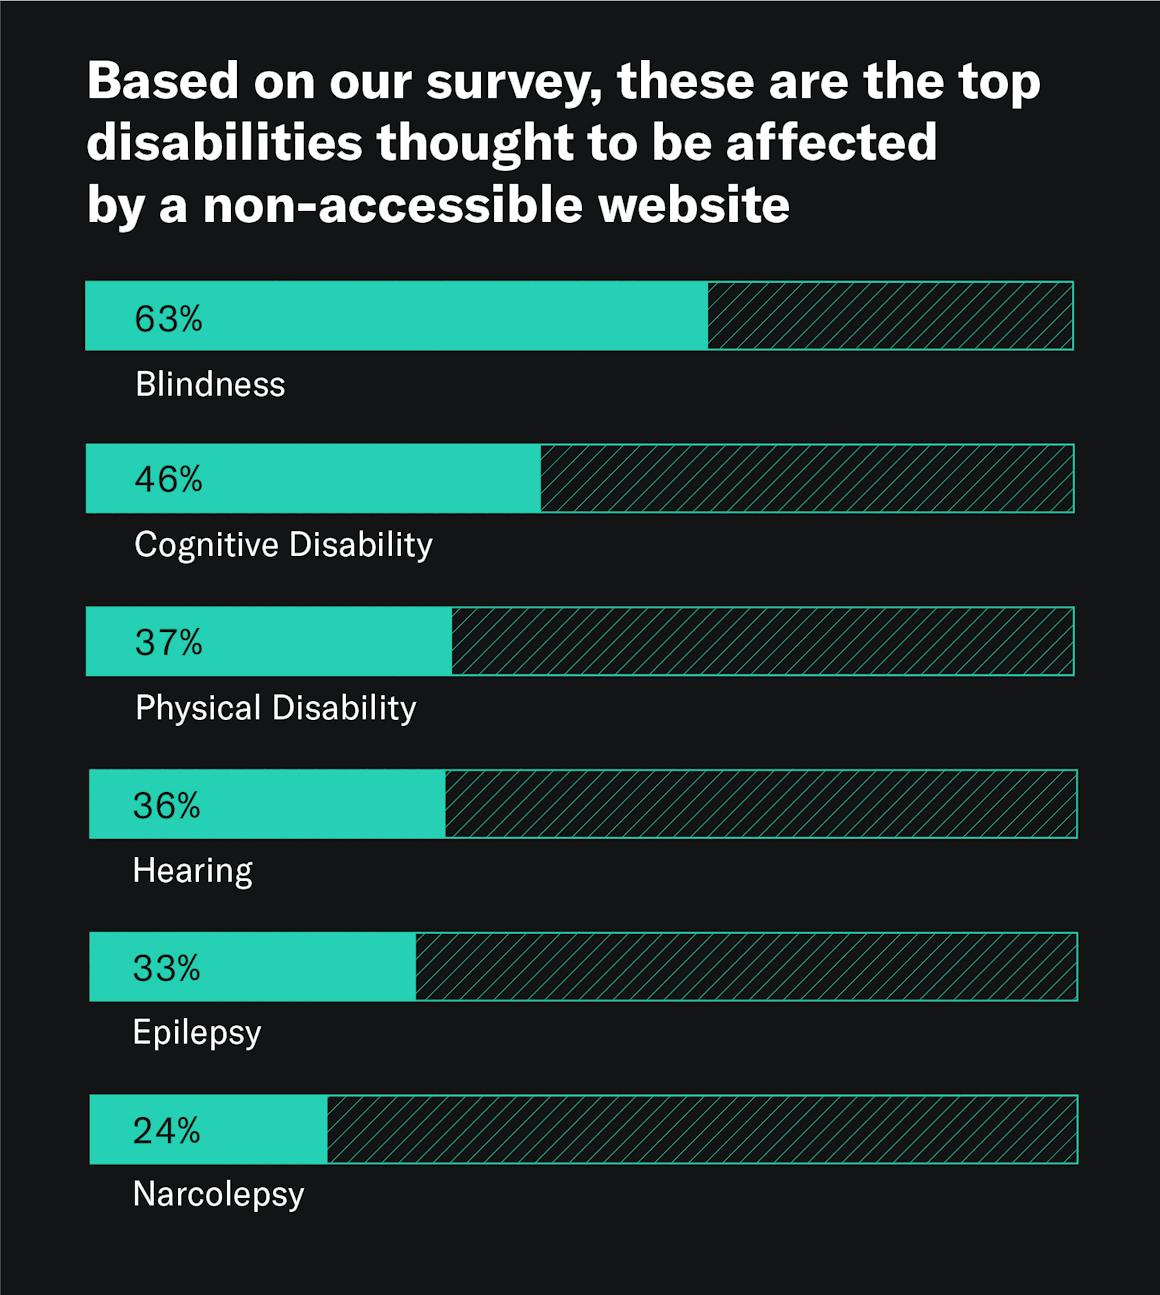 A graphic that shows that leaders, managers, and designers/developers polled believe that blindness and visual impairment are the top disability that makes a website non-accessible (63%), followed by cognitive disability (46%), physical disability (37%), hearing (36%), epilepsy (33%), and narcolepsy (24%).